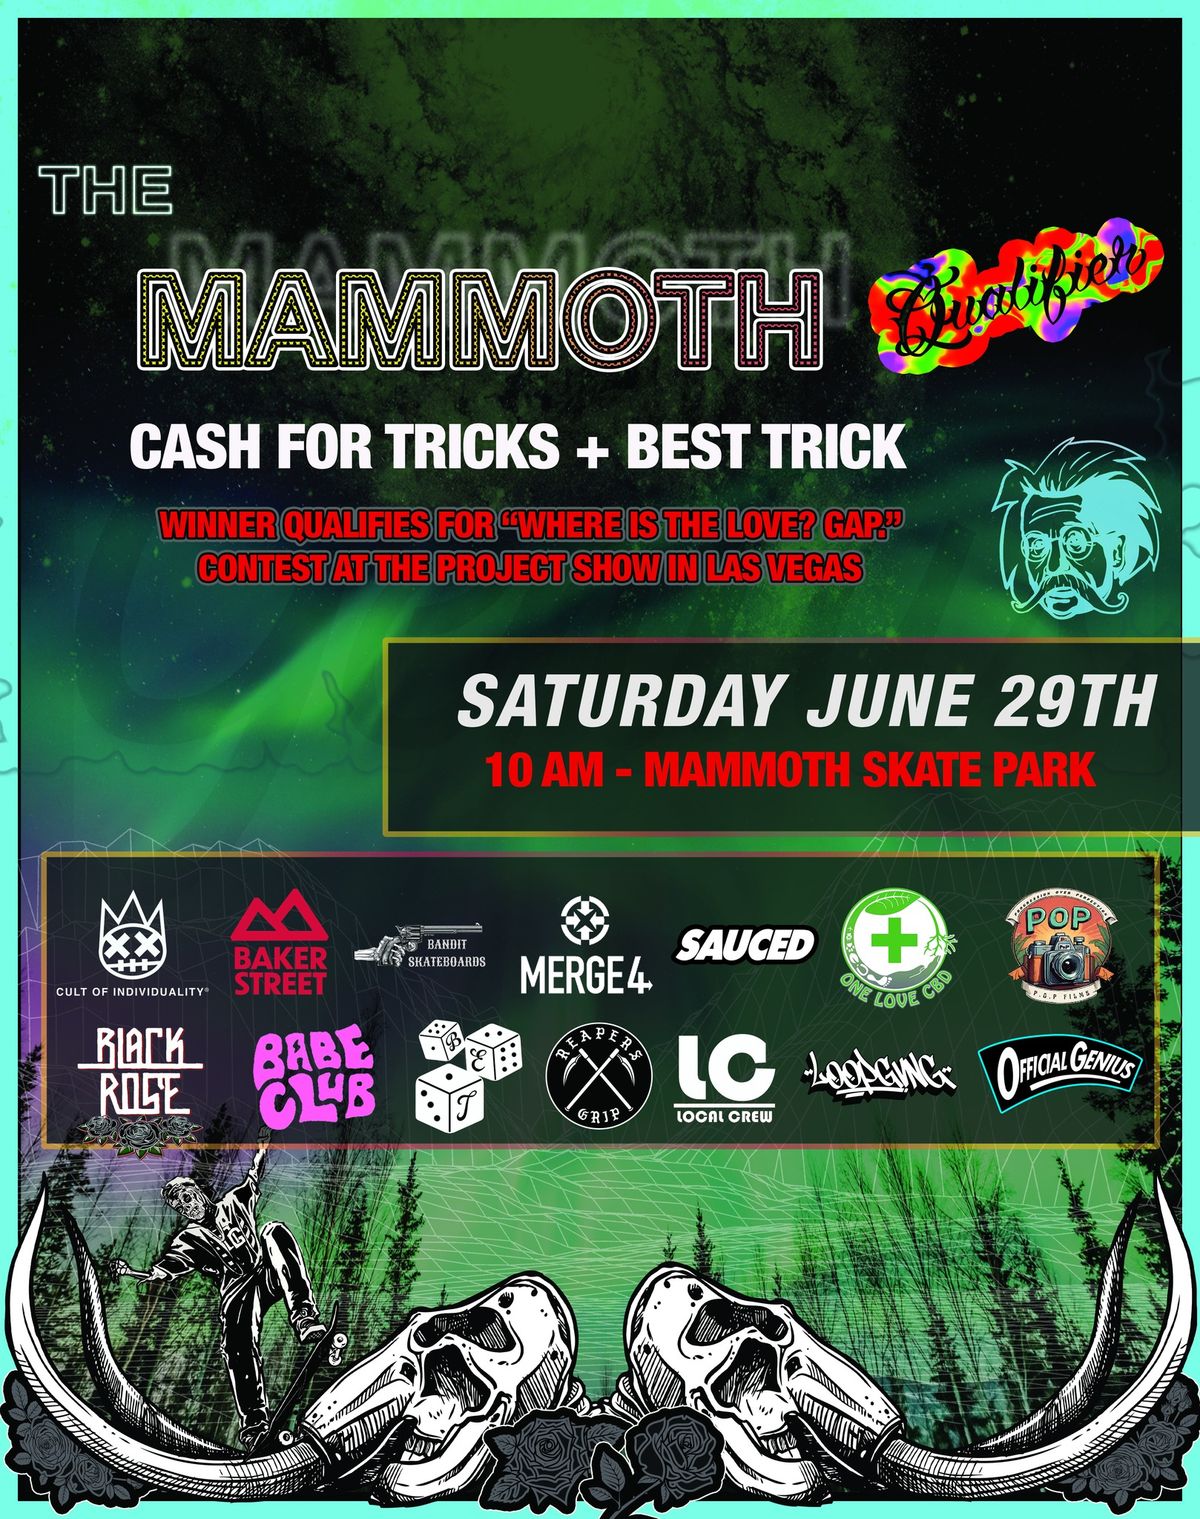 The Mammoth Trip - Best Trick Contest at Mammoth Feel Good Fest